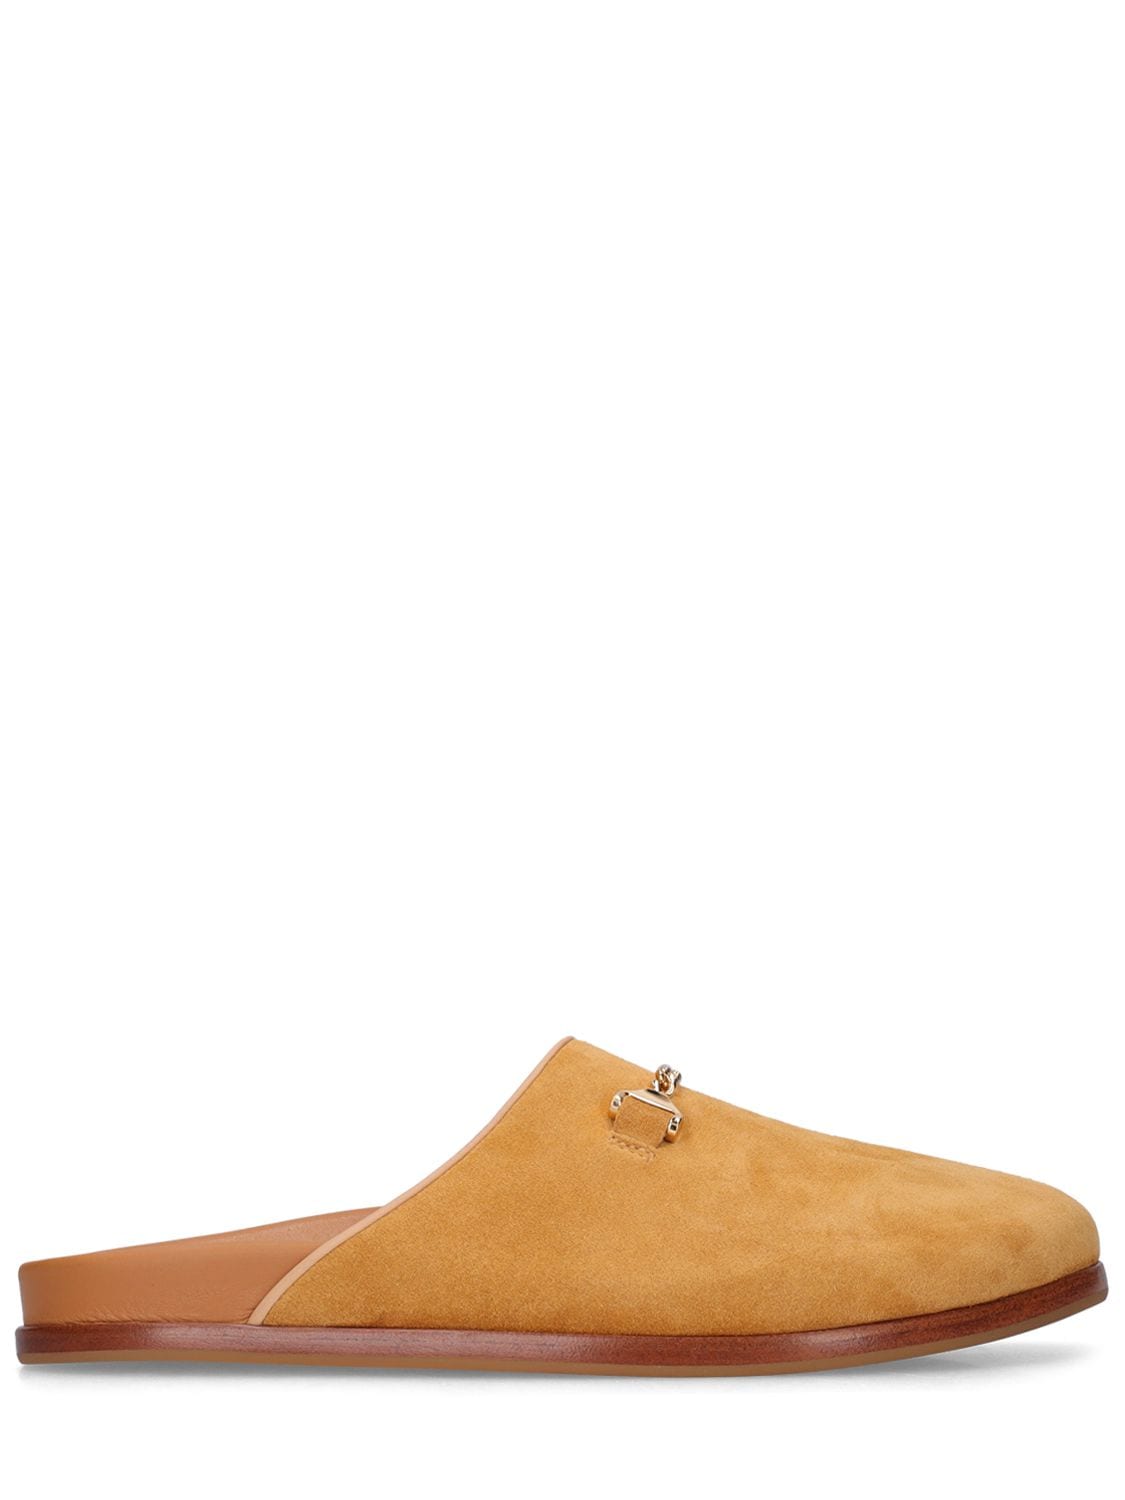 HYUSTO Quincy Suede Slippers